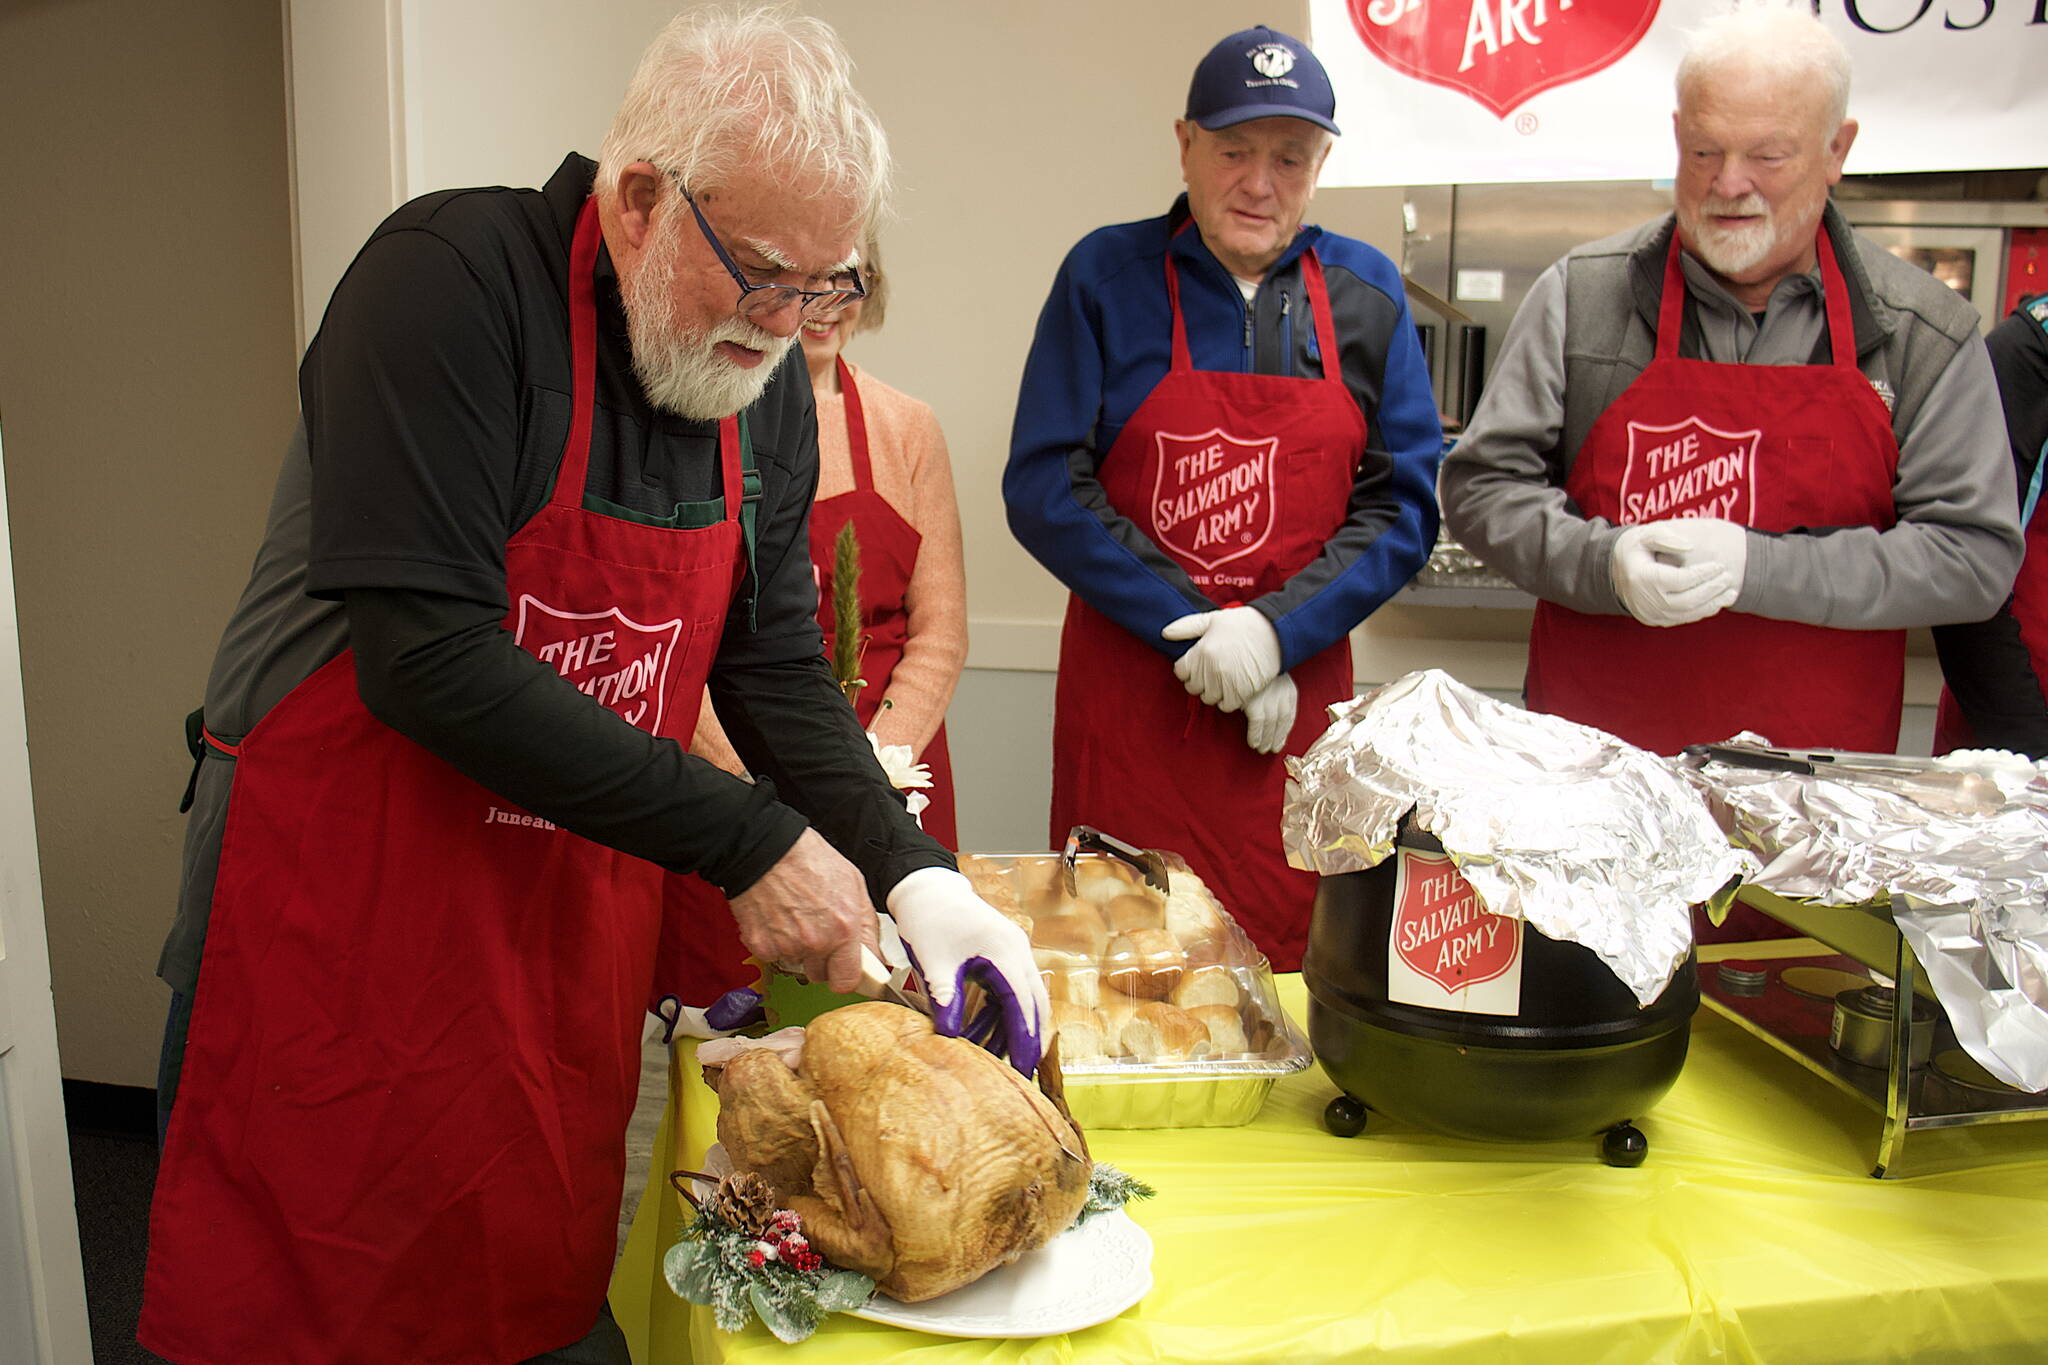 Jerry Harmon performs the ceremonial first carving of a turkey at The Salvation Army Juneau Corps’ annual communal Thanksgiving meal on Thursday at the Juneau Yacht Club. (Mark Sabbatini / Juneau Empire)